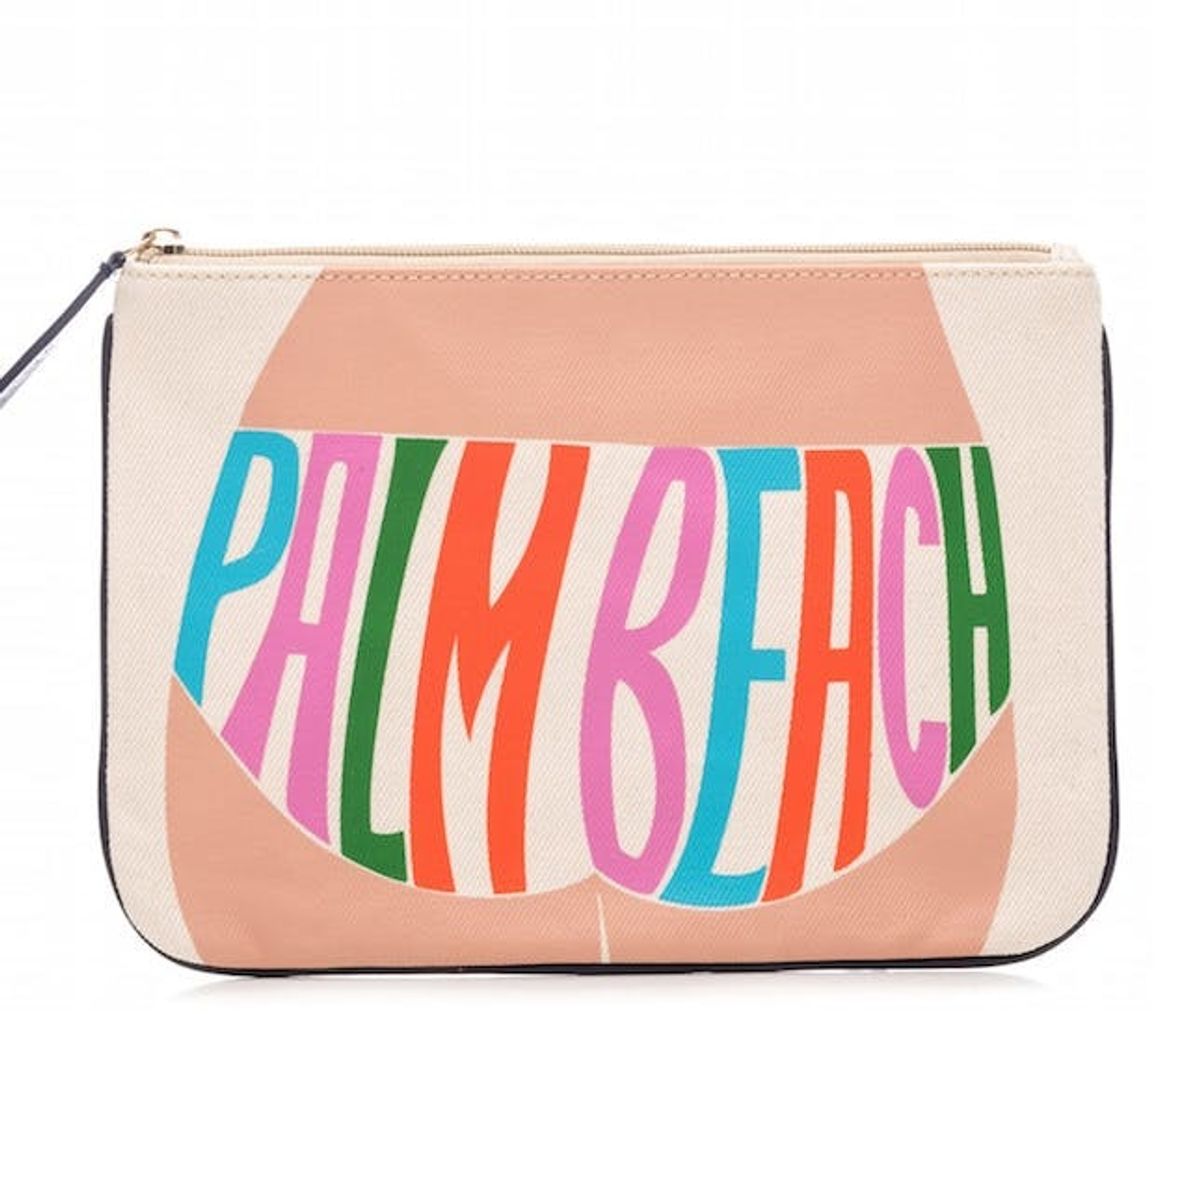 20 OMG-Worthy Bags + Clutches for Every Summer Look